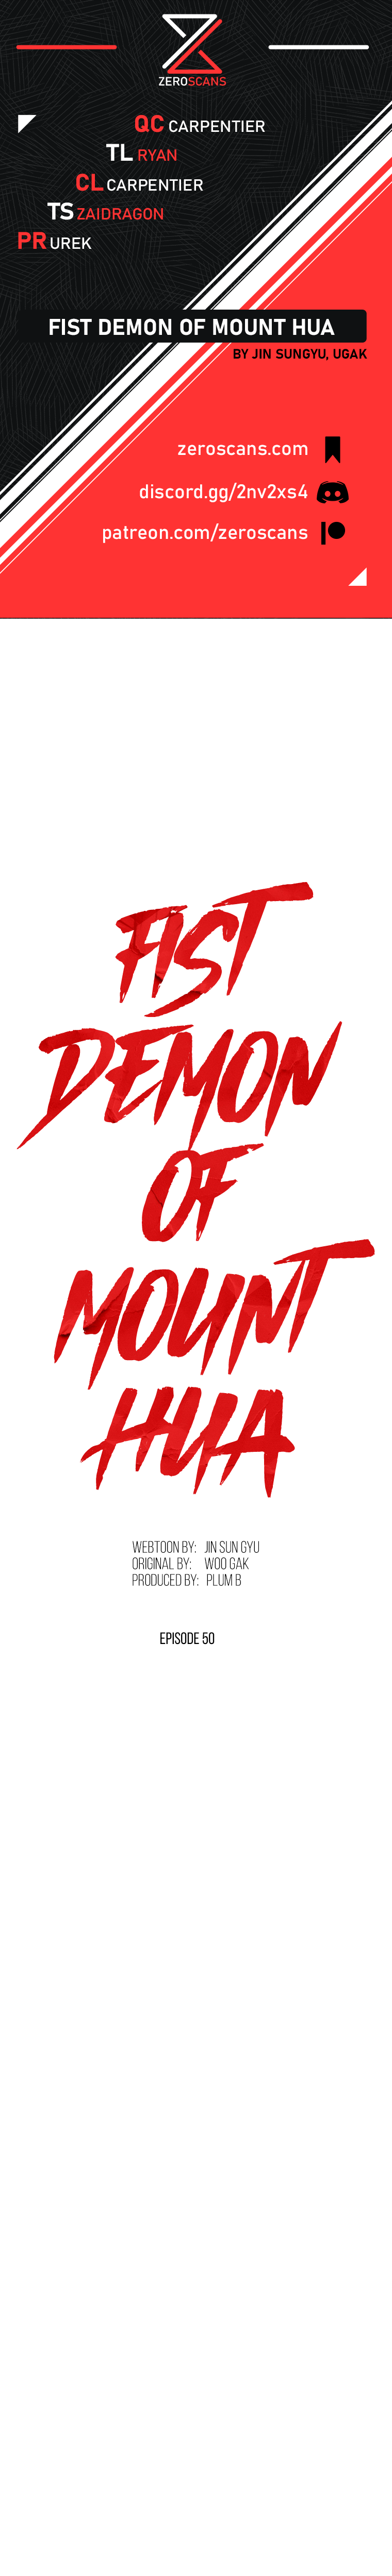 Fist Demon of Mount Hua - Chapter 9212 - Image 1